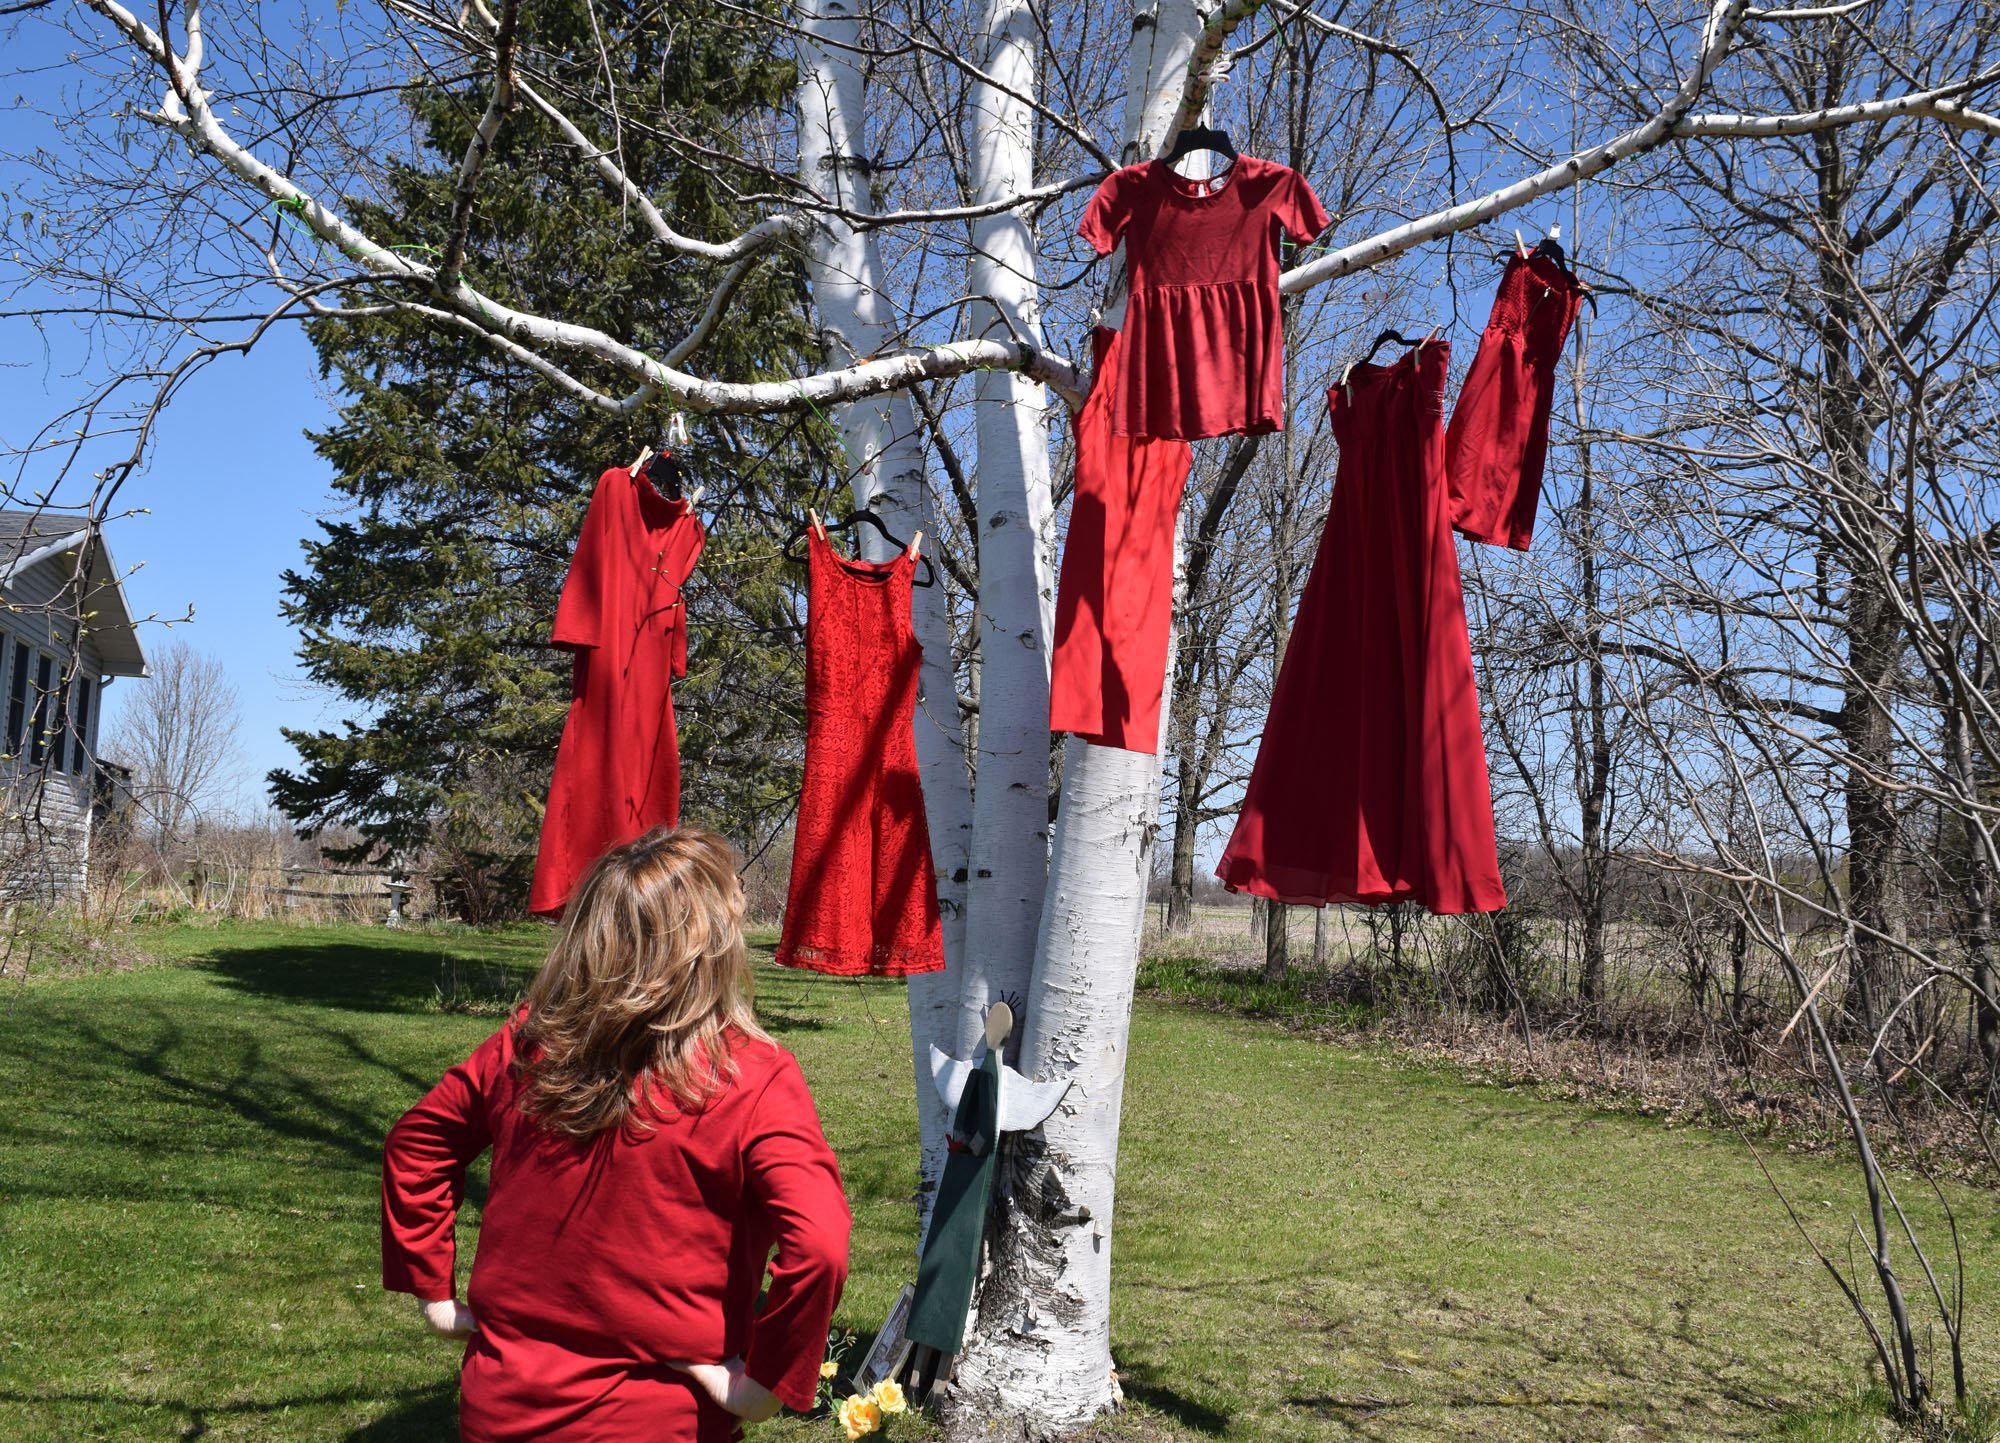 Red Dress Project remembers missing and murdered Indigenous women and girls